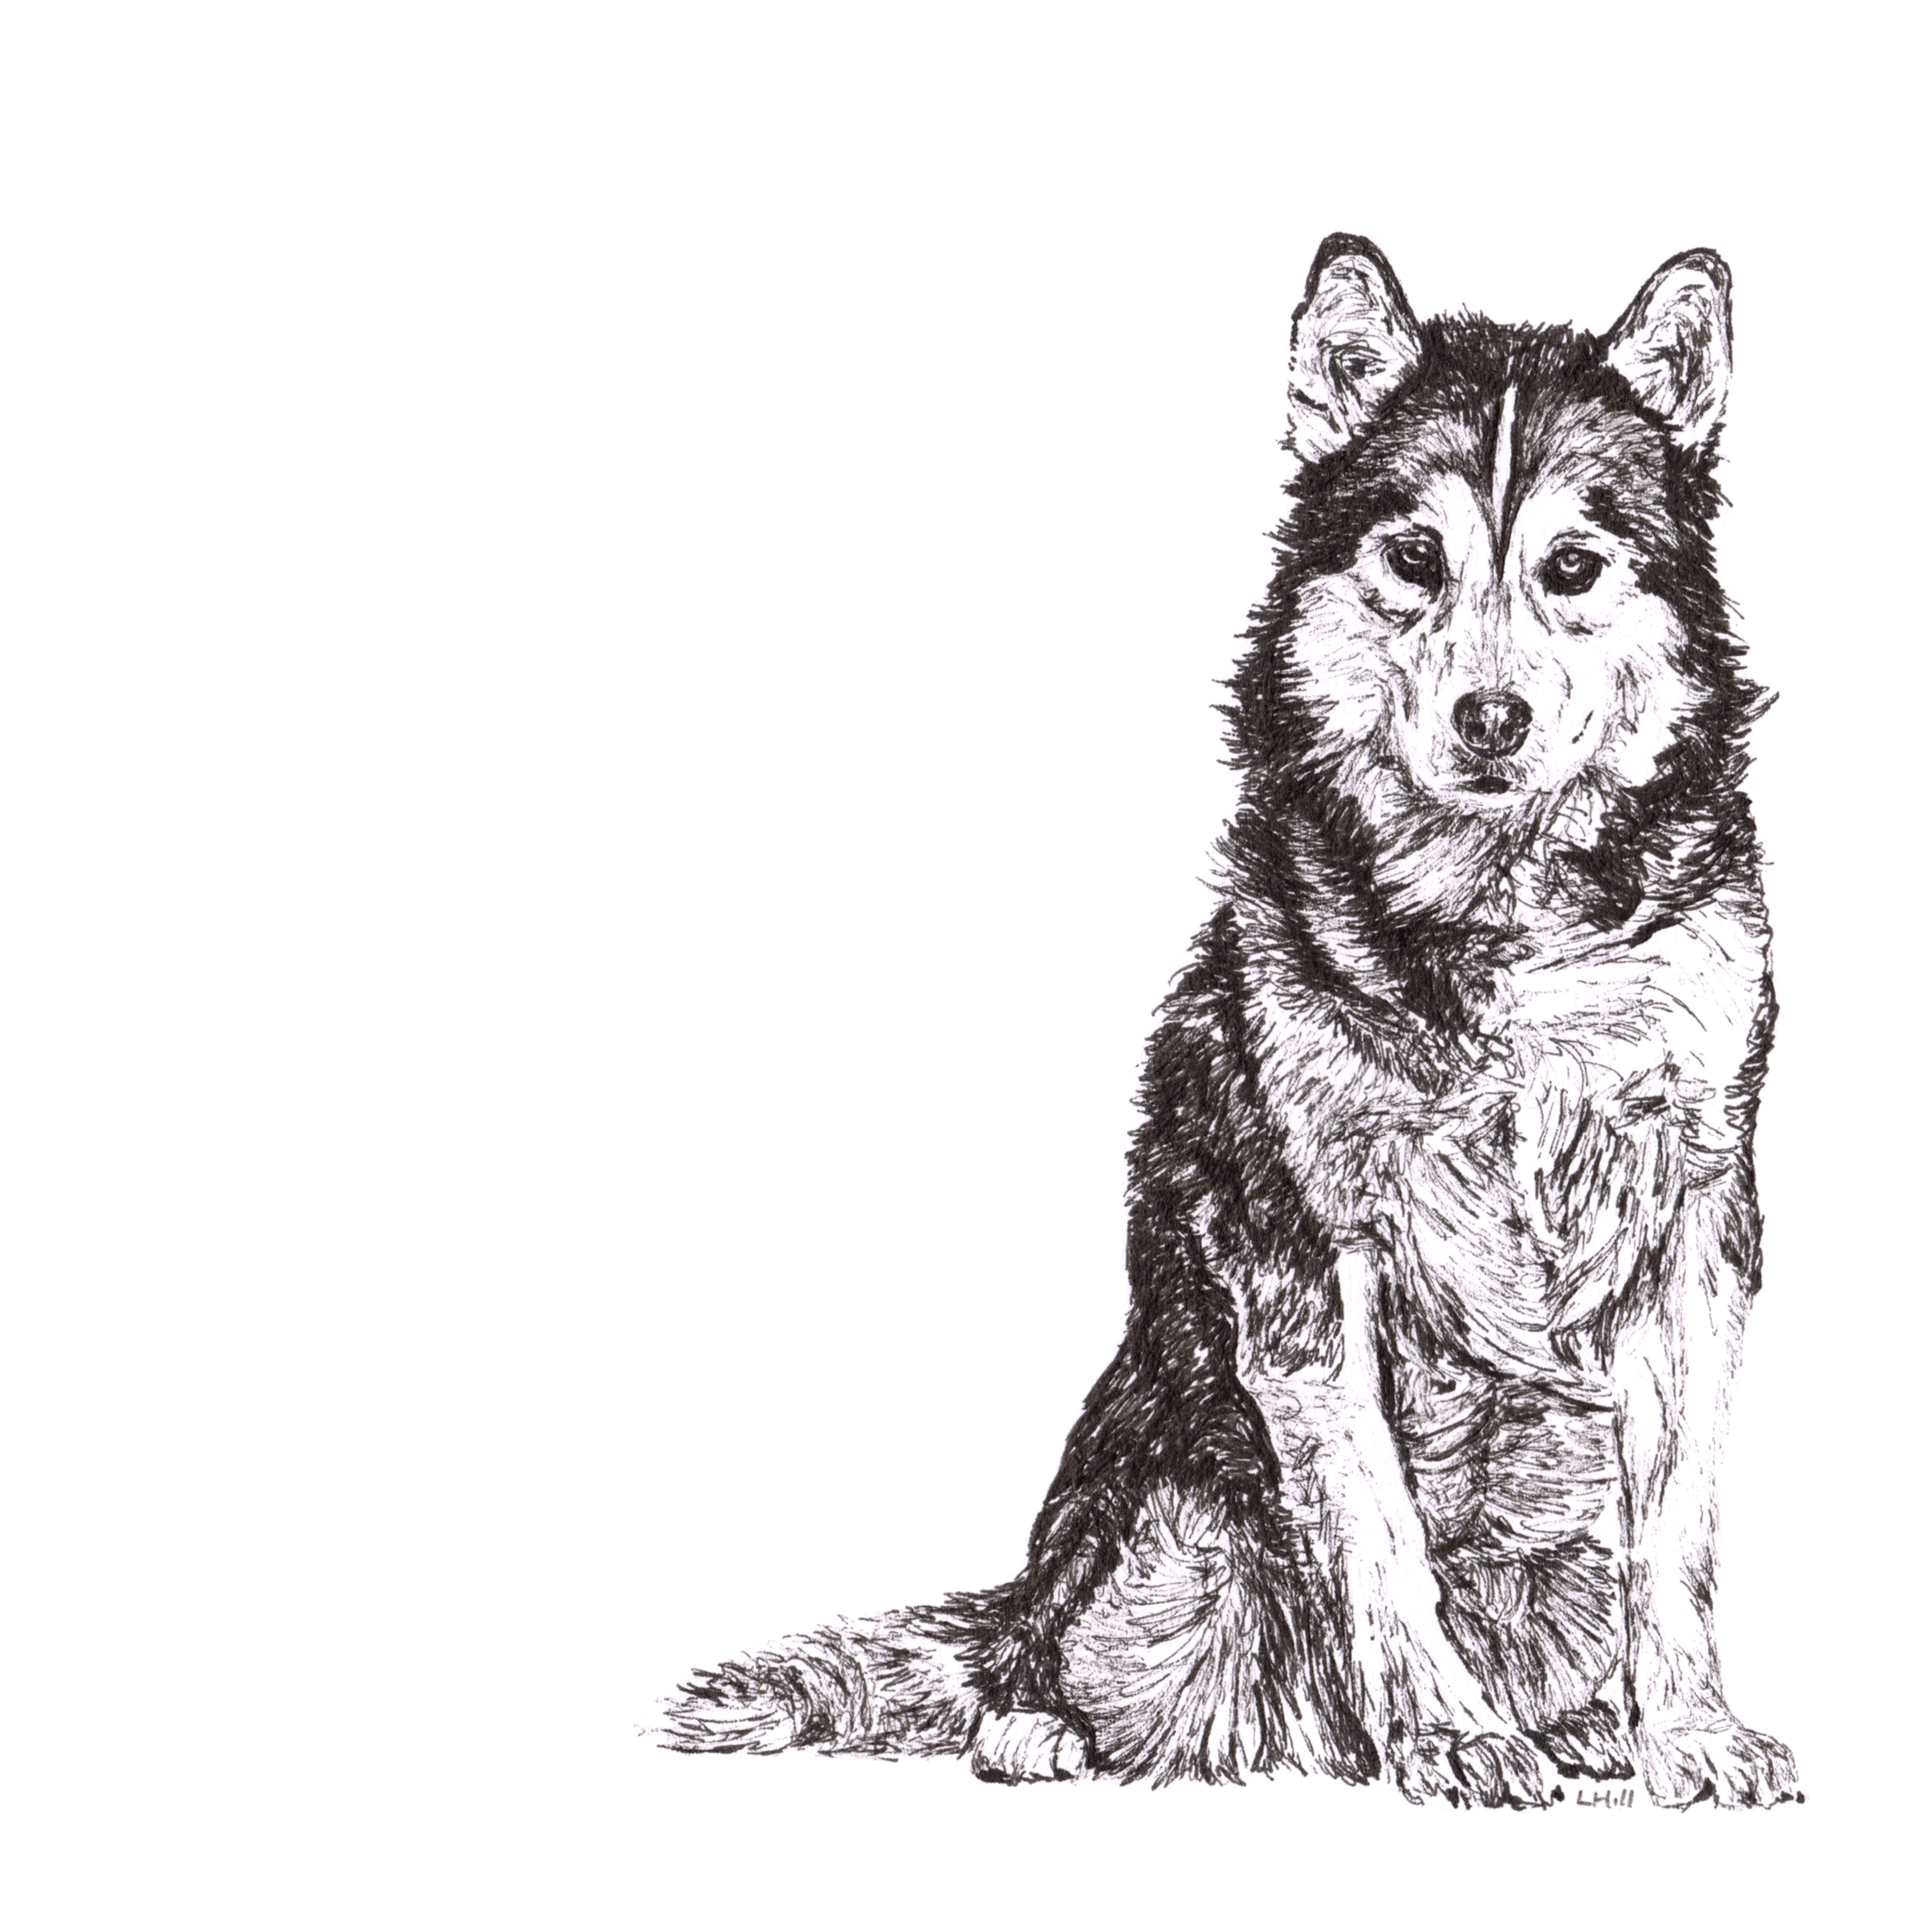 Siberian Husky pen and ink illustration by Louisa Hill